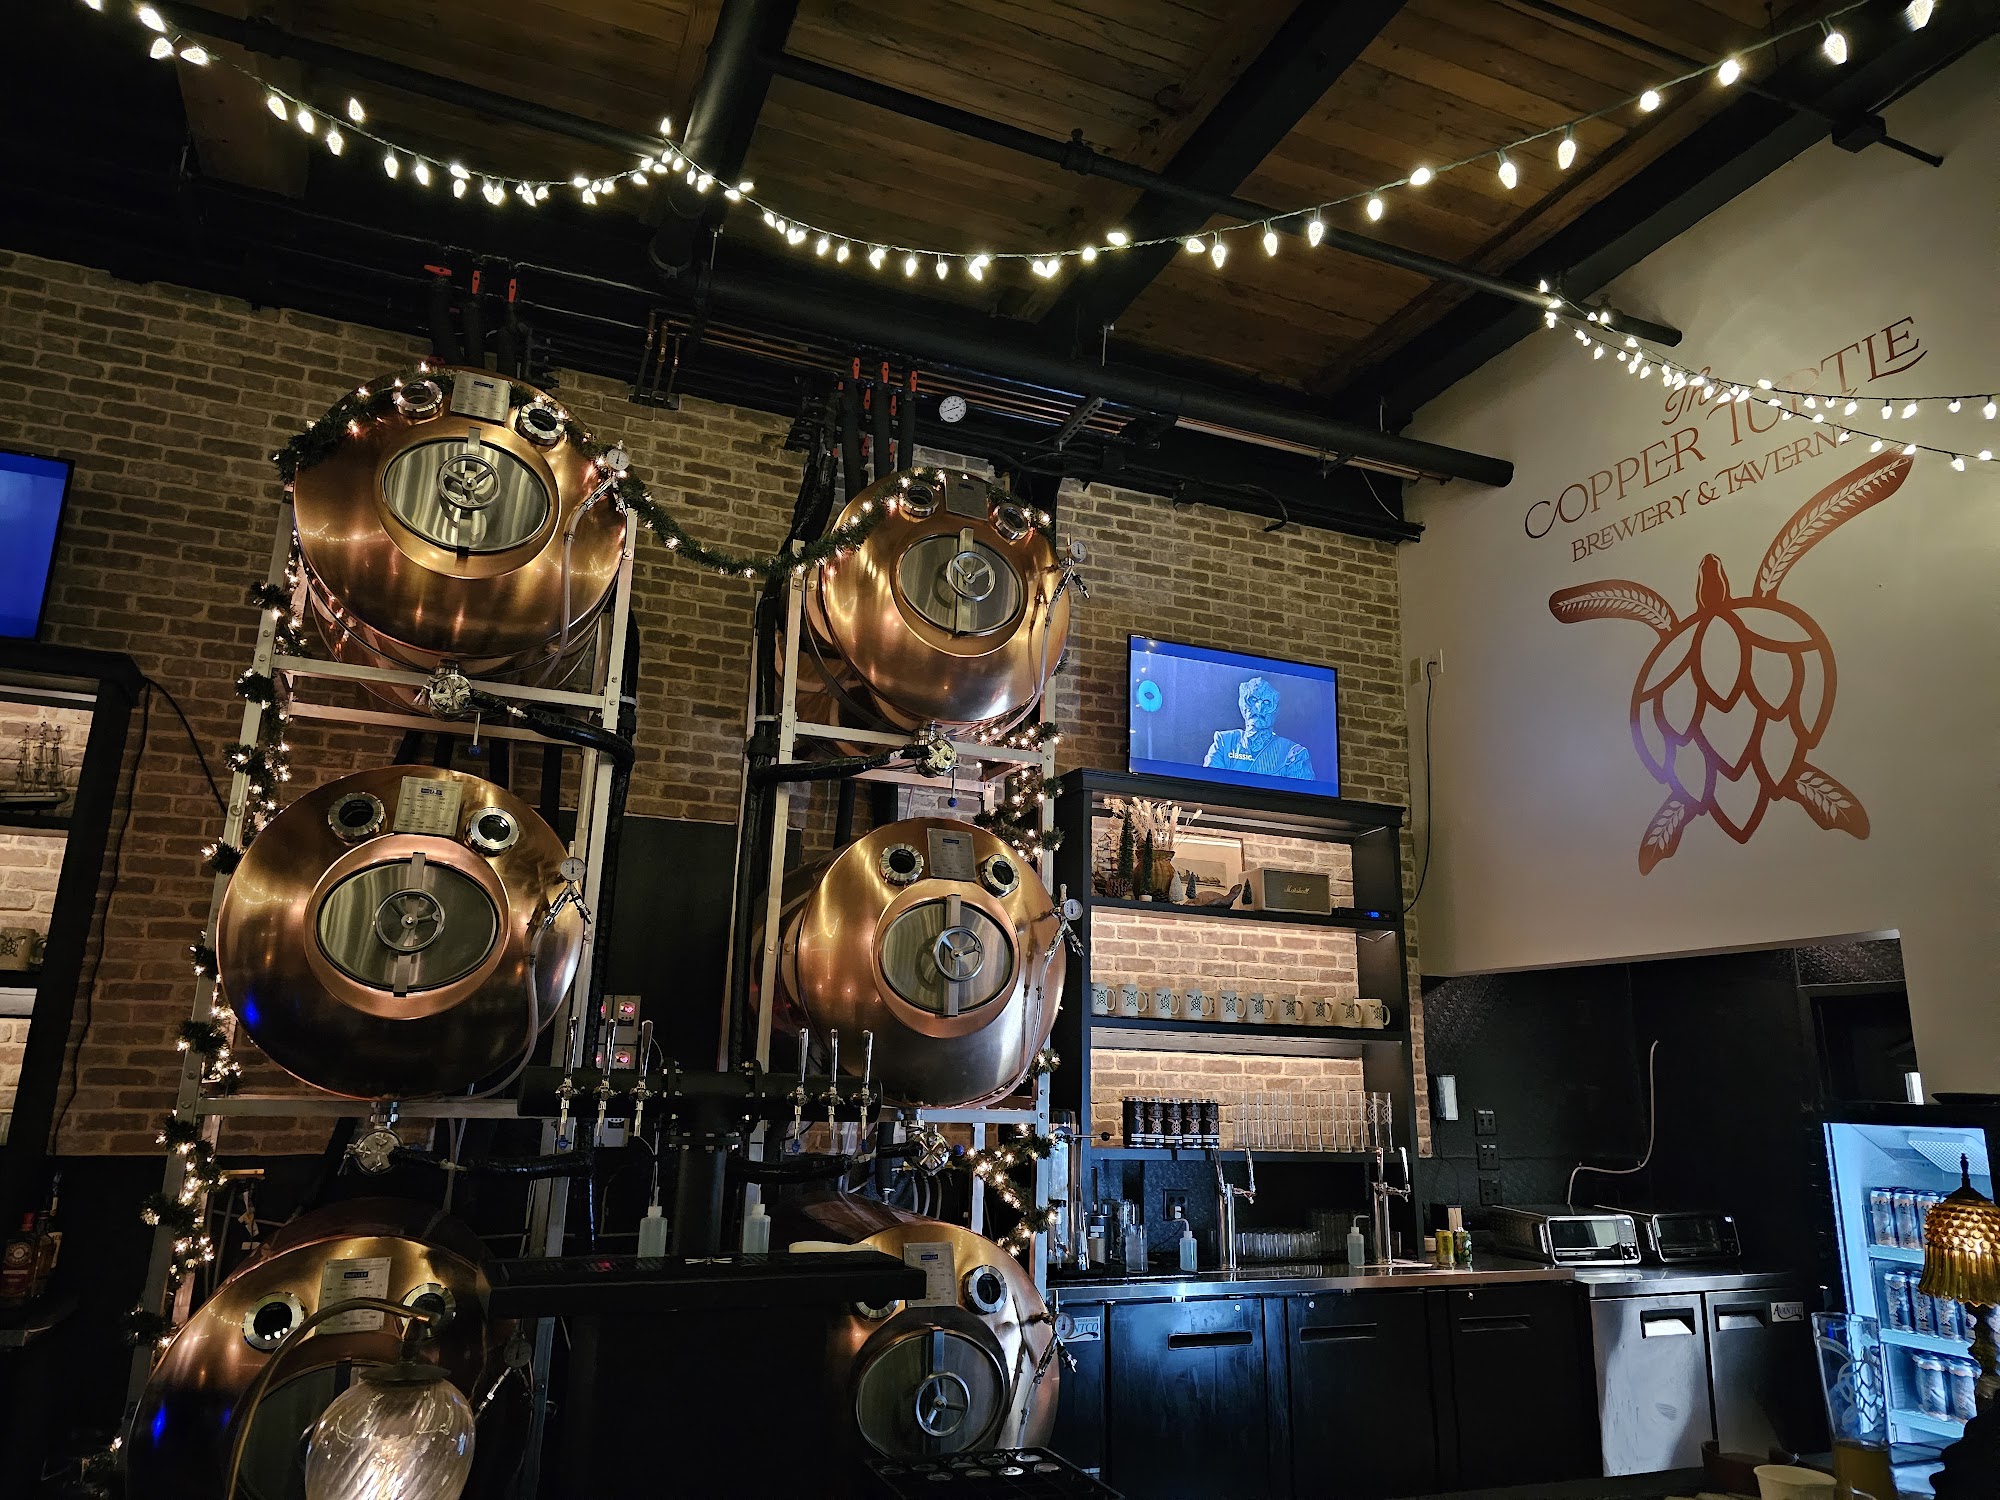 The Copper Turtle Brewery & Taverne